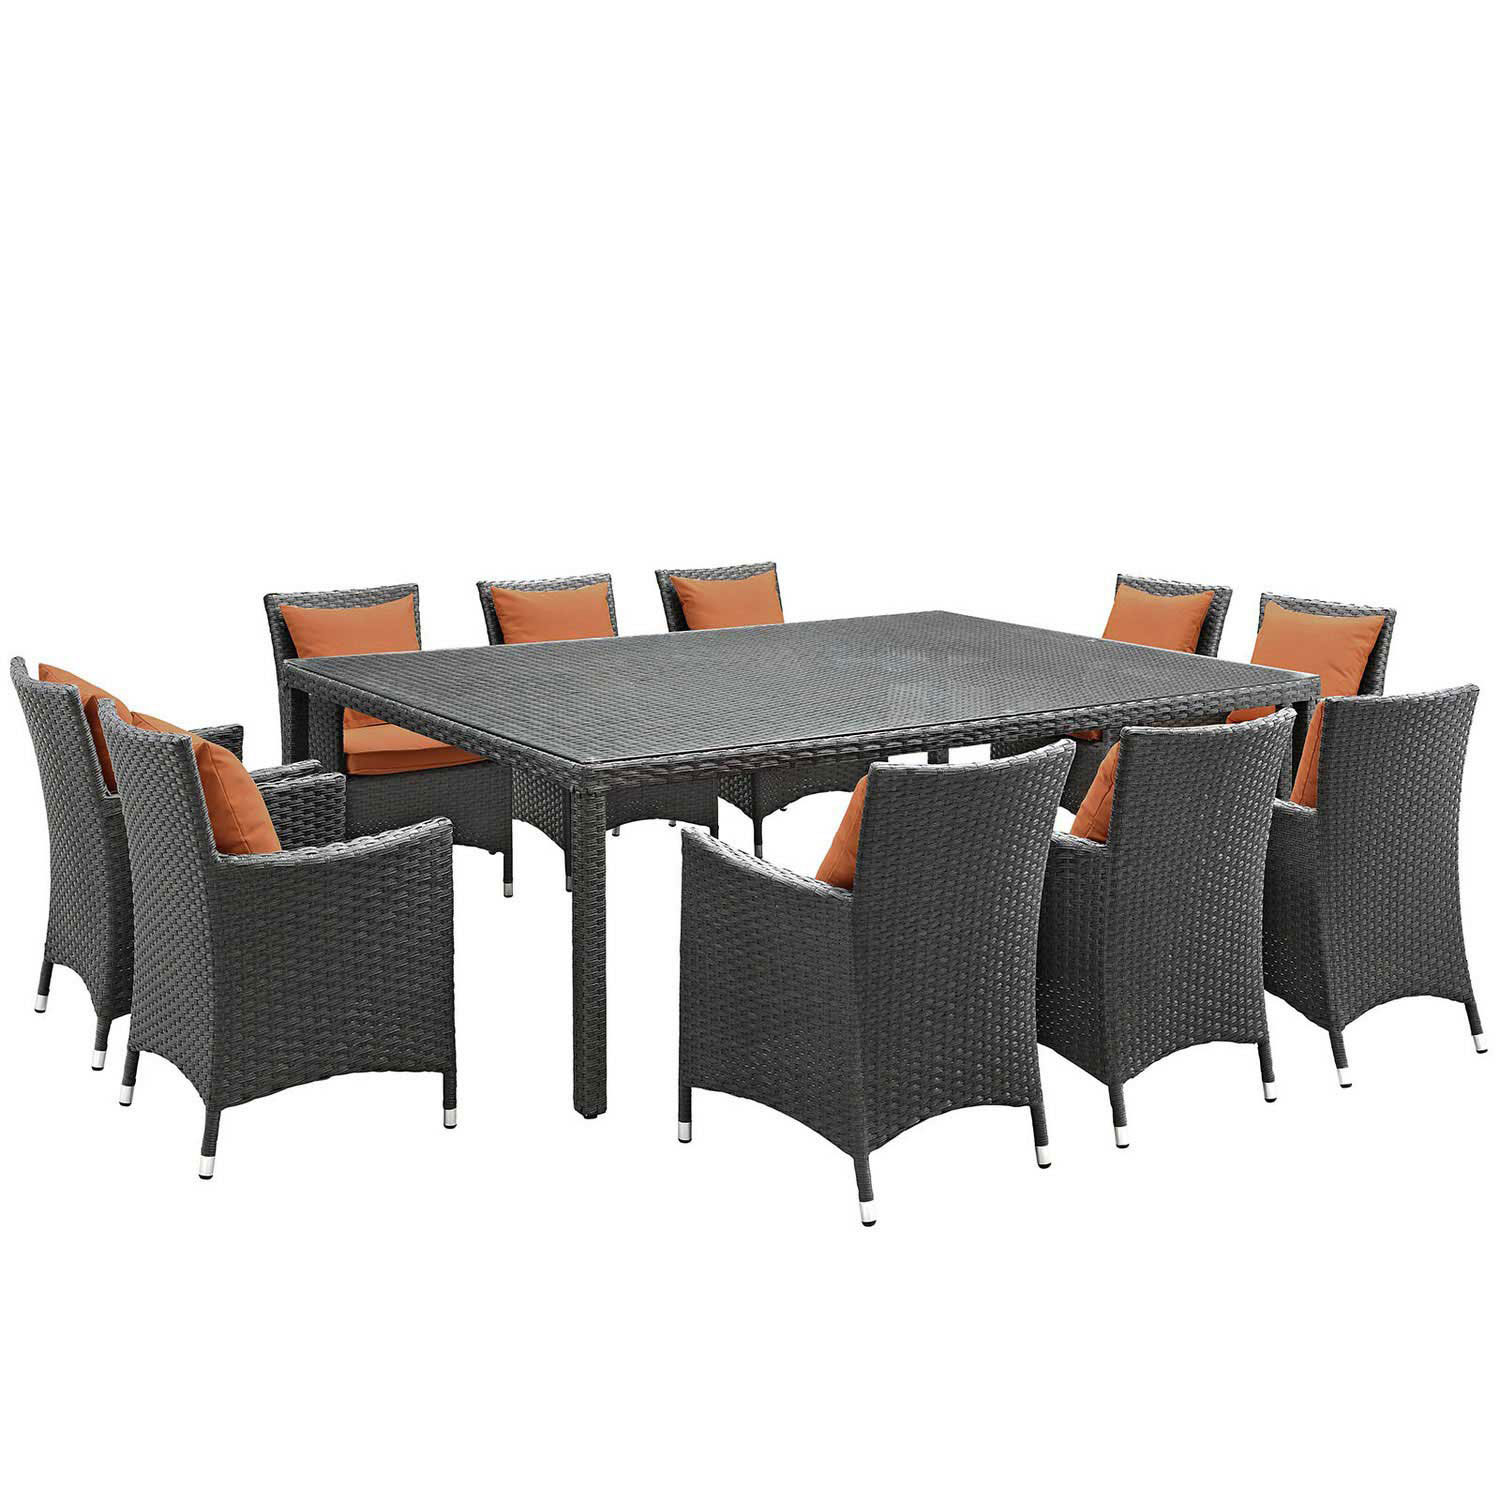 Modway Sojourn 11 Piece Outdoor Patio Sunbrella Dining Set - Canvas Tuscan